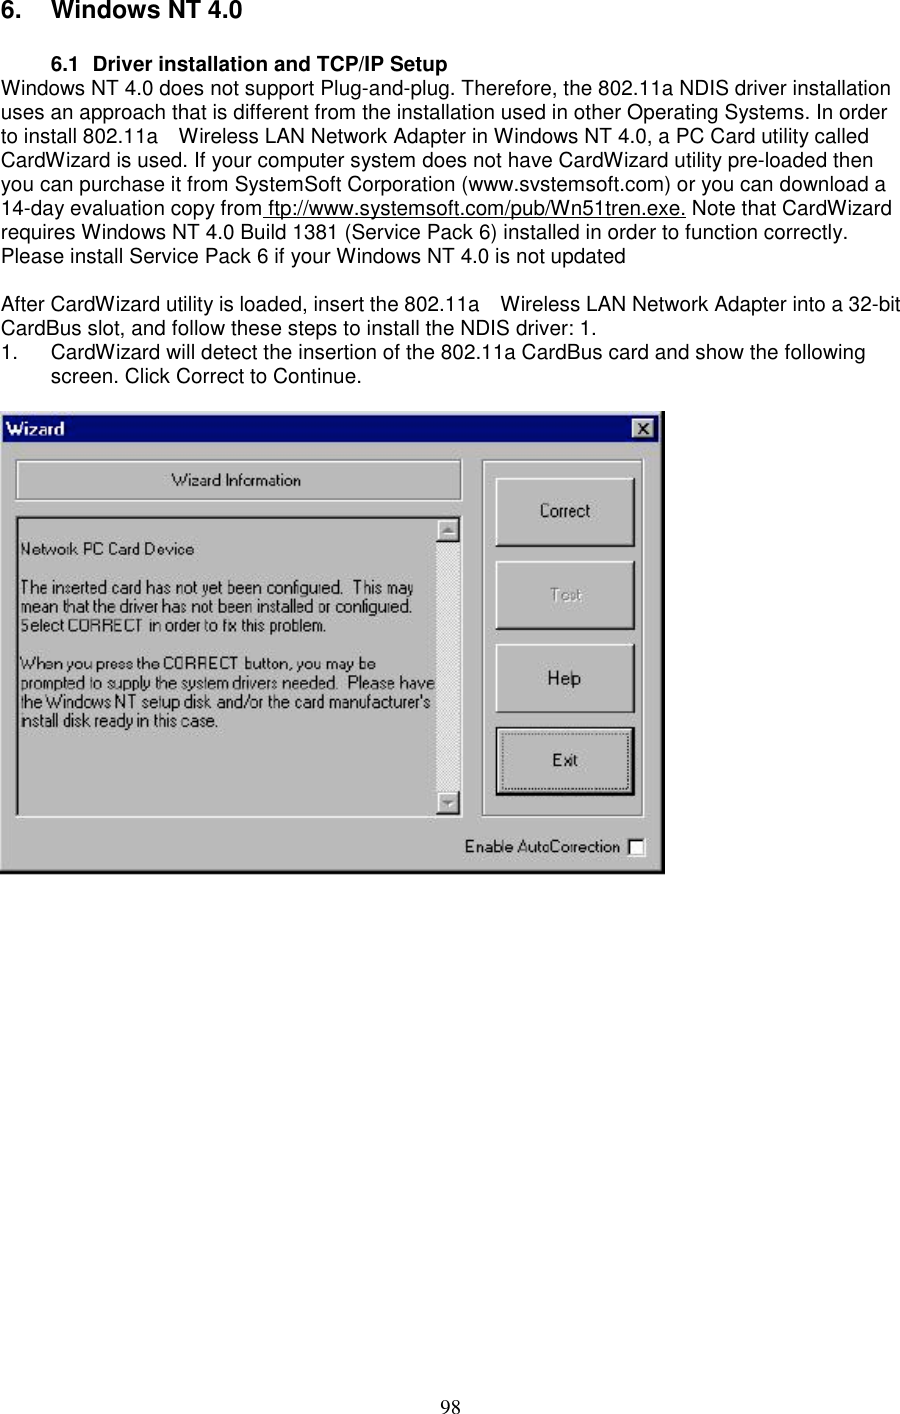 986. Windows NT 4.06.1  Driver installation and TCP/IP SetupWindows NT 4.0 does not support Plug-and-plug. Therefore, the 802.11a NDIS driver installationuses an approach that is different from the installation used in other Operating Systems. In orderto install 802.11a    Wireless LAN Network Adapter in Windows NT 4.0, a PC Card utility calledCardWizard is used. If your computer system does not have CardWizard utility pre-loaded thenyou can purchase it from SystemSoft Corporation (www.svstemsoft.com) or you can download a14-day evaluation copy from ftp://www.systemsoft.com/pub/Wn51tren.exe. Note that CardWizardrequires Windows NT 4.0 Build 1381 (Service Pack 6) installed in order to function correctly.Please install Service Pack 6 if your Windows NT 4.0 is not updatedAfter CardWizard utility is loaded, insert the 802.11a    Wireless LAN Network Adapter into a 32-bitCardBus slot, and follow these steps to install the NDIS driver: 1.1.  CardWizard will detect the insertion of the 802.11a CardBus card and show the followingscreen. Click Correct to Continue.